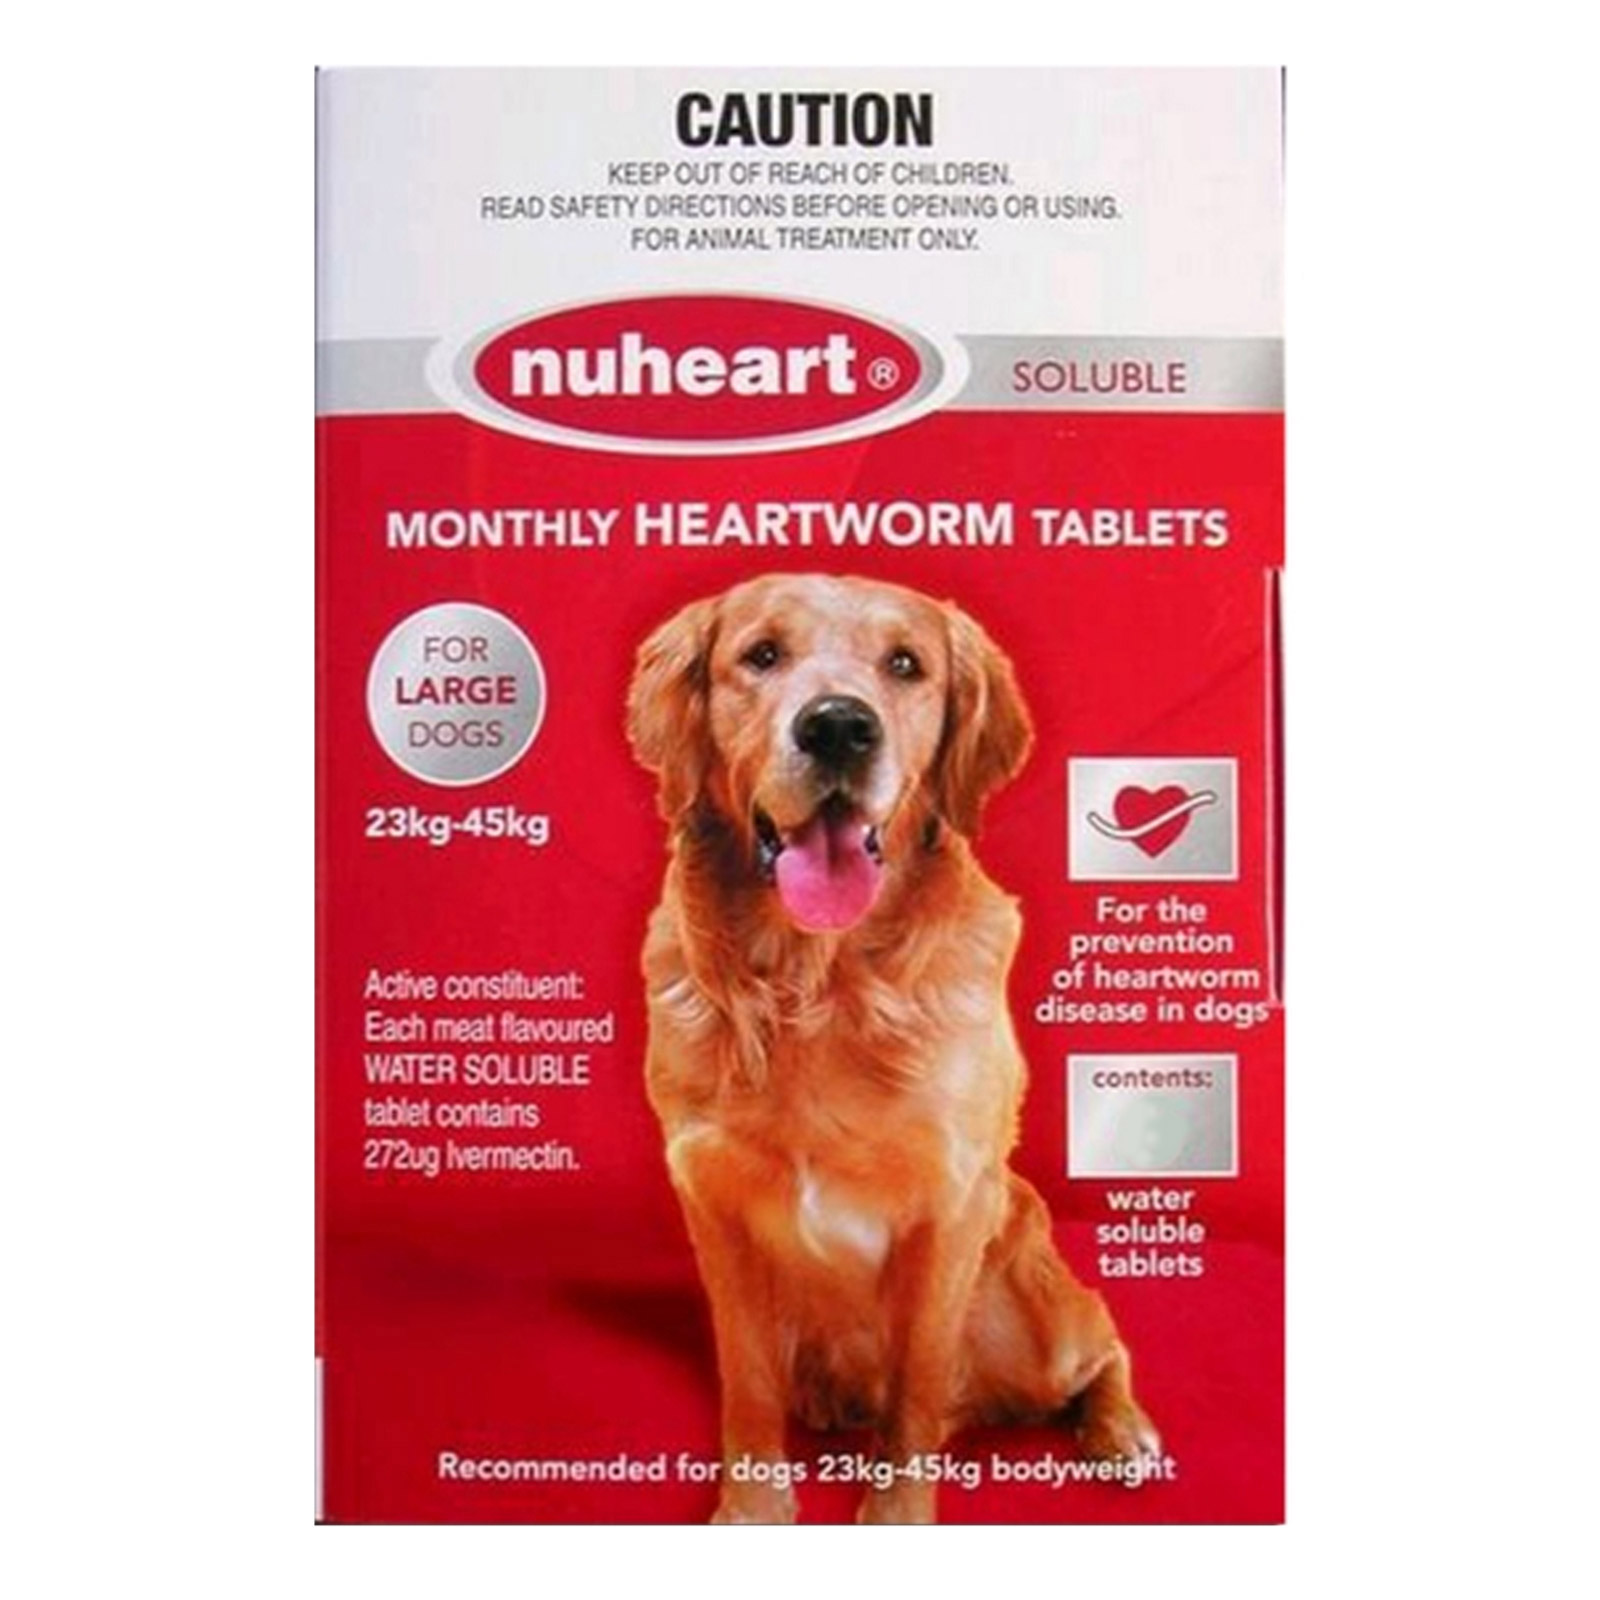 Heartgard Plus Generic Nuheart for Large Dogs 51-100lbs (Red) 12 TABLET